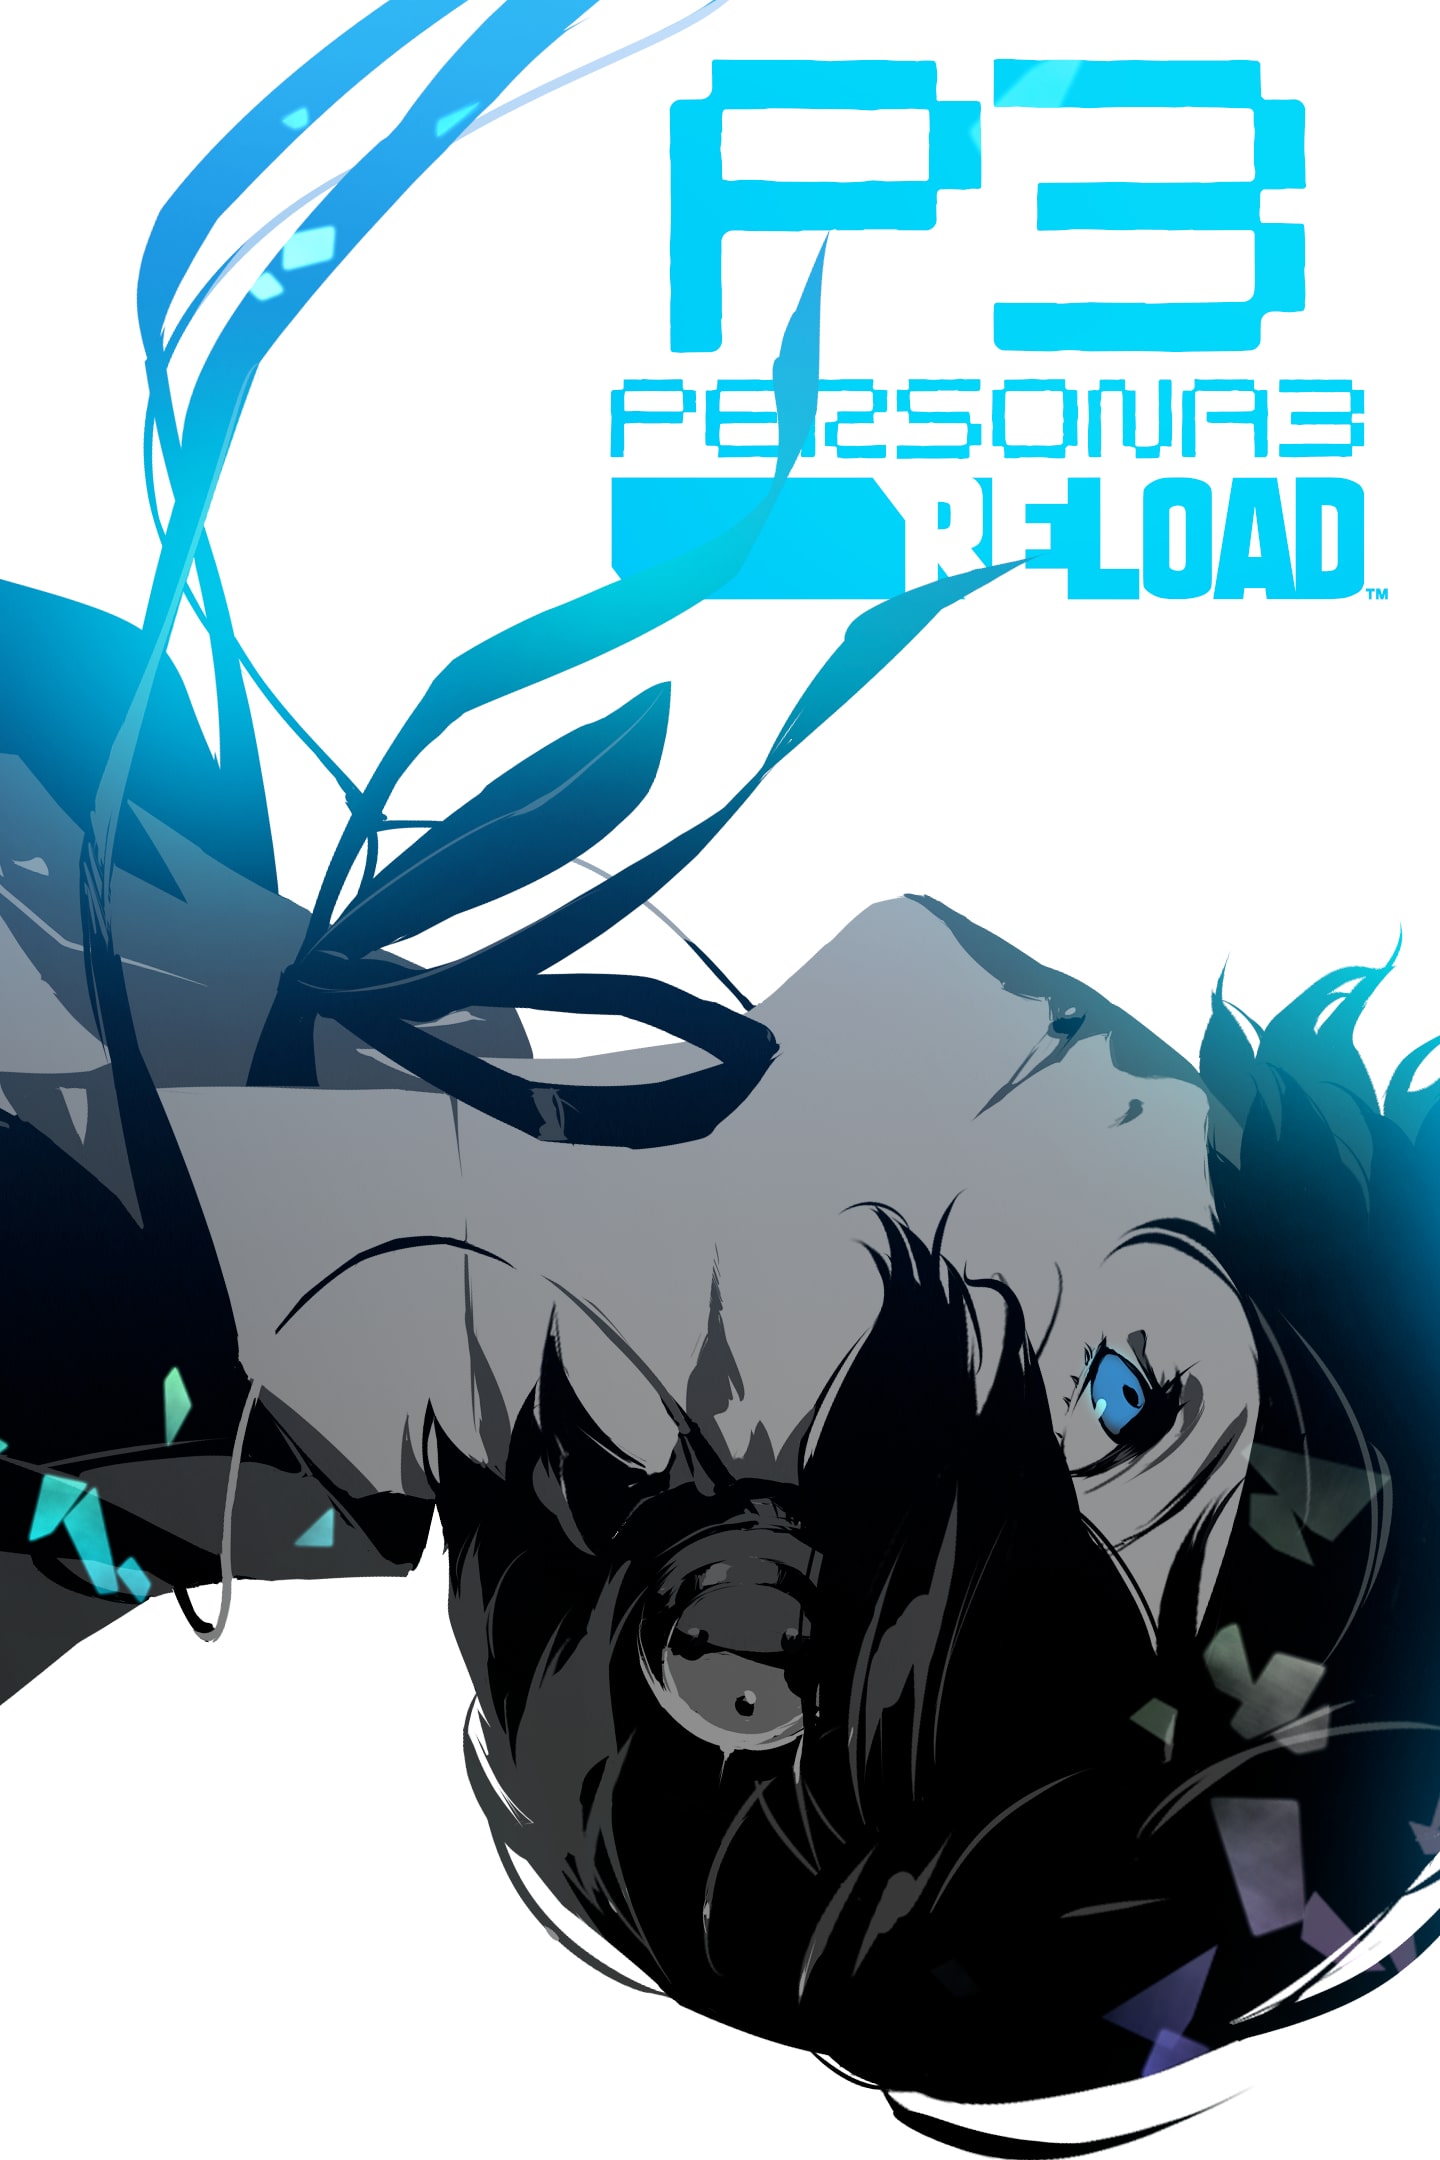 Persona 3 Reload, Sony Playstation 4